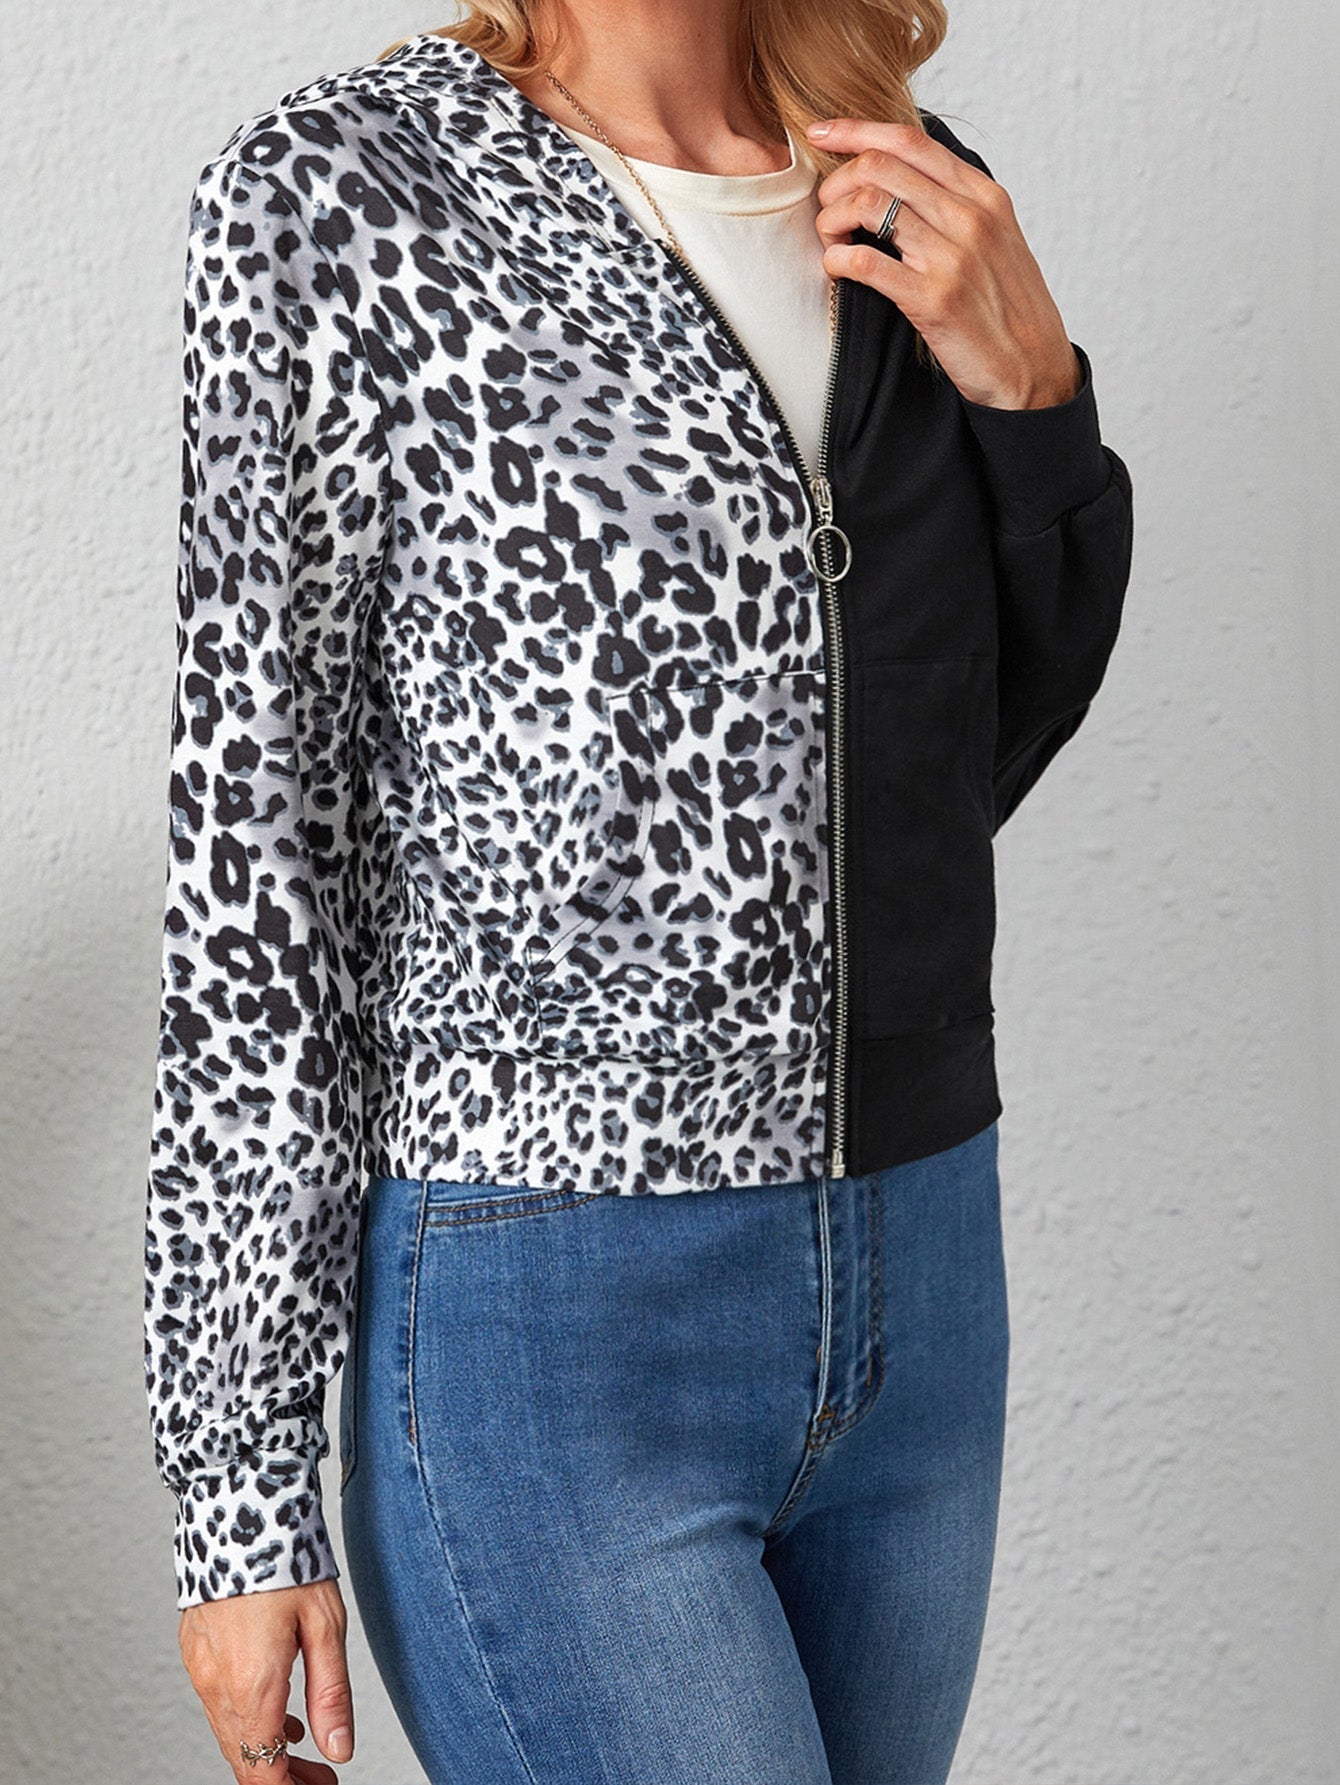 Two Tone Leopard Zip Up Jacket with Hoodie Sai Feel